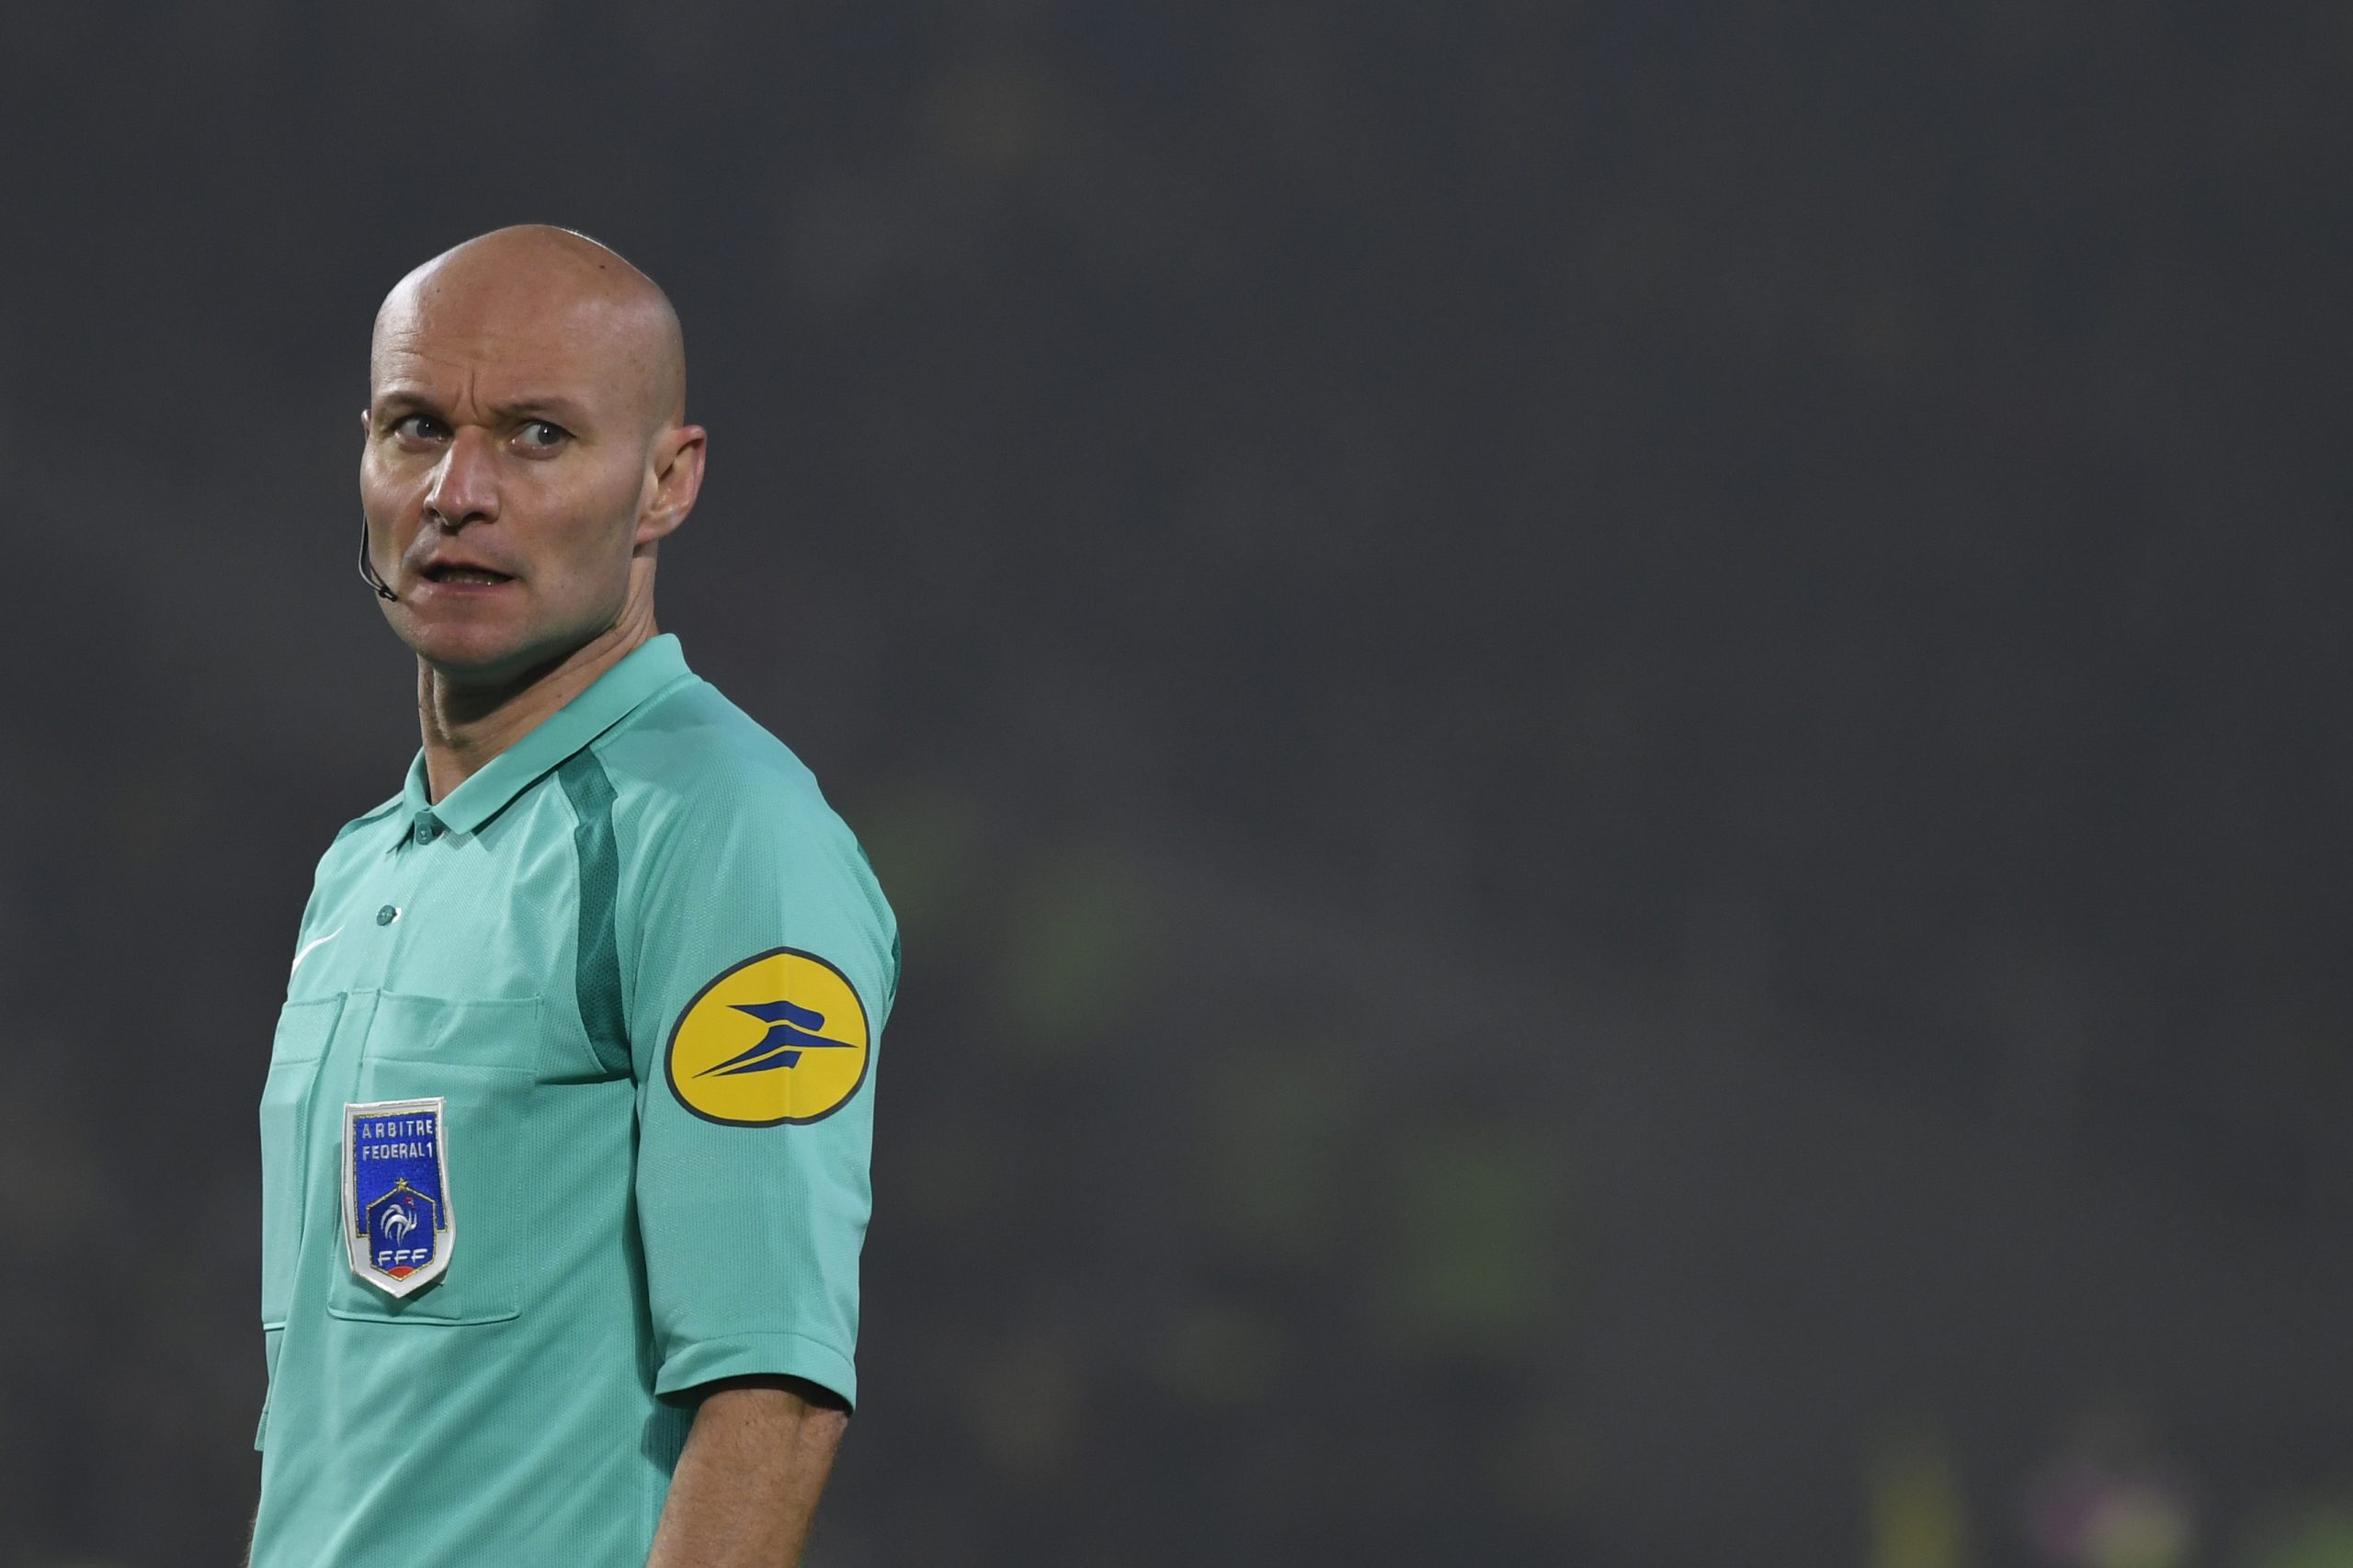 Former Ligue 1 referee admits to awarding contentious goals based on quality of move